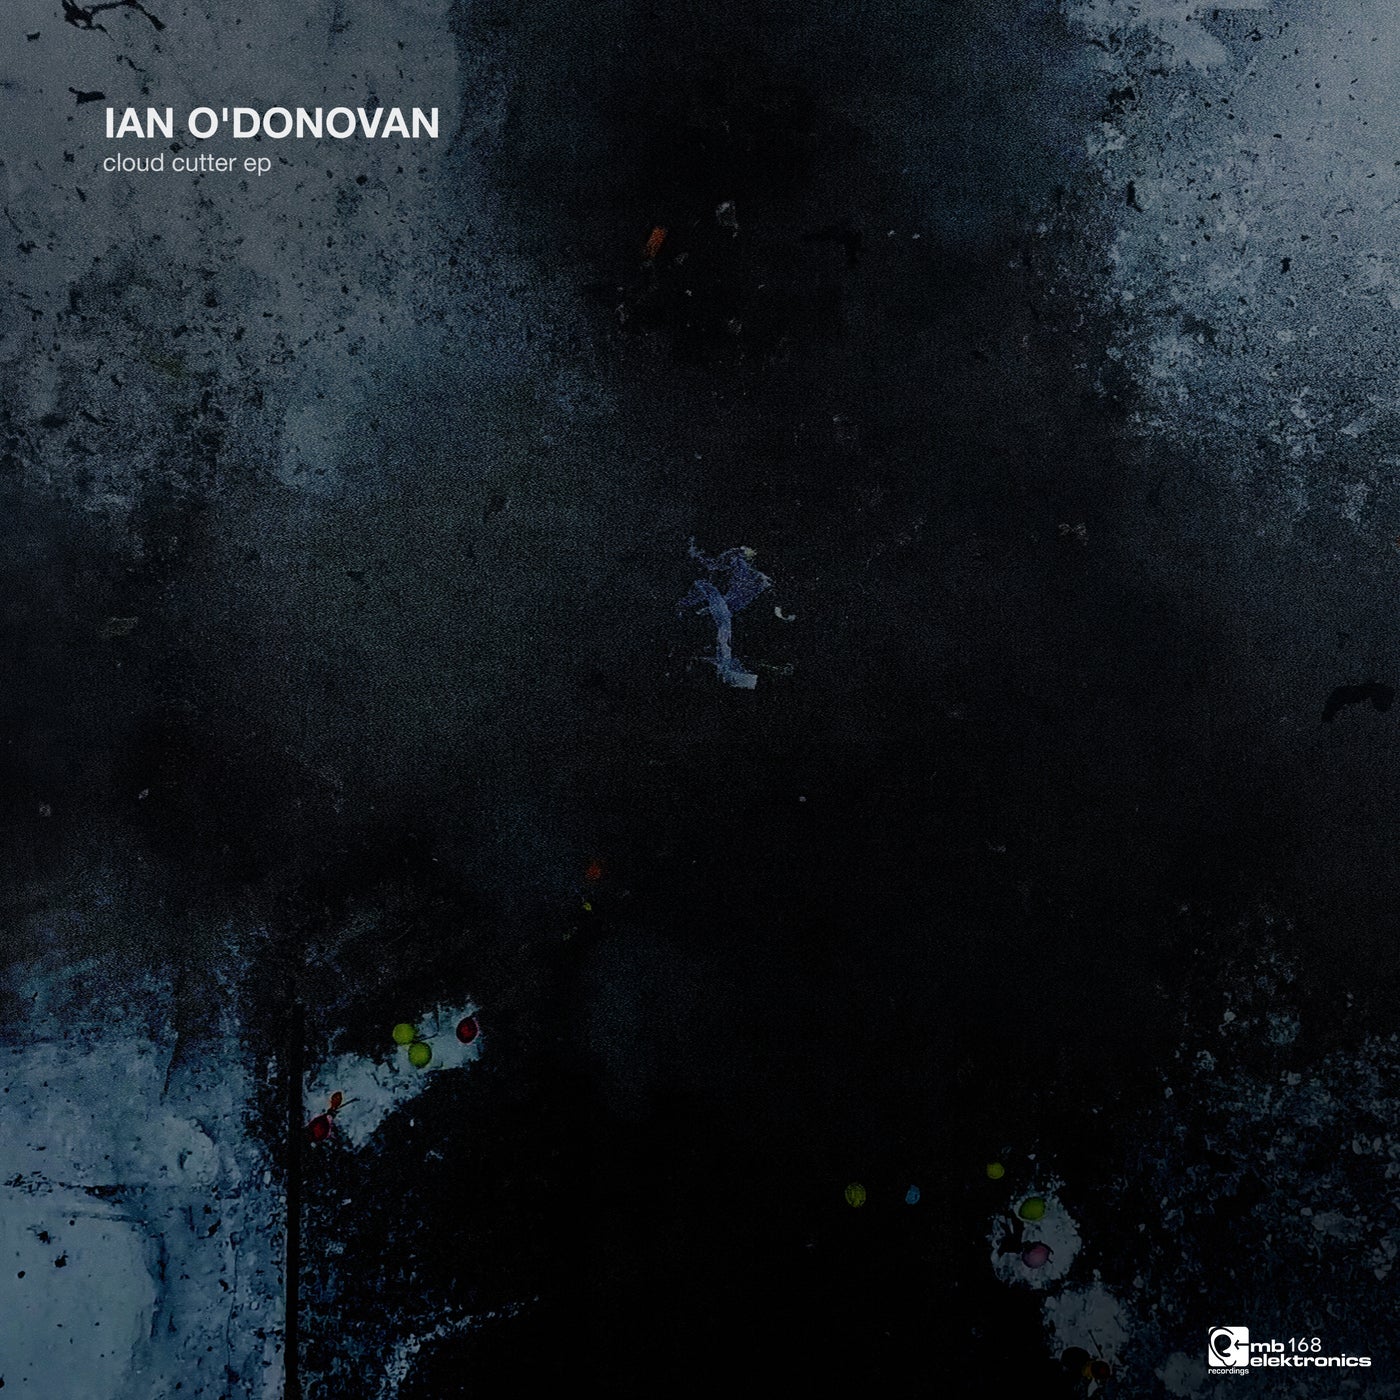 image cover: Ian O'Donovan - Cloud Cutter EP / MBE168